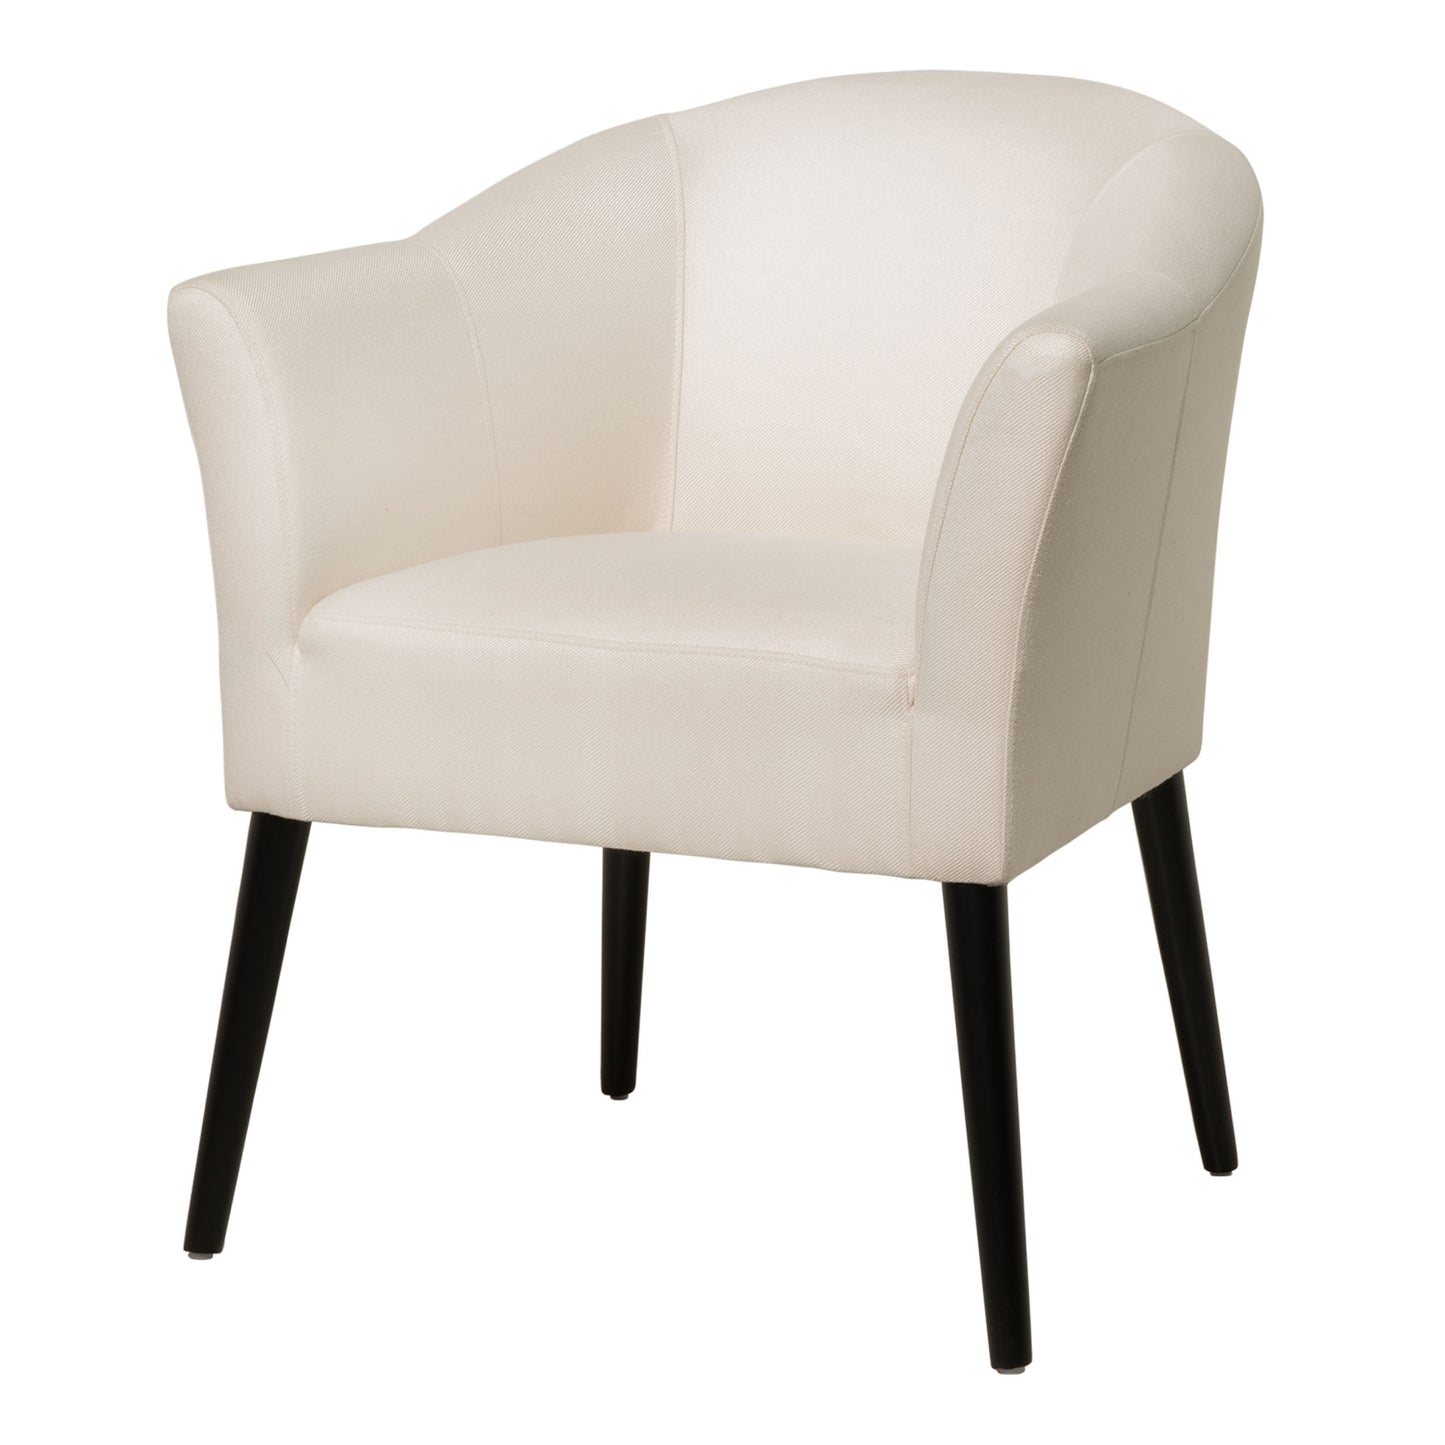 Charmaine Mid-Century Modern Low Back Fabric Accent Chair with Tapered Legs